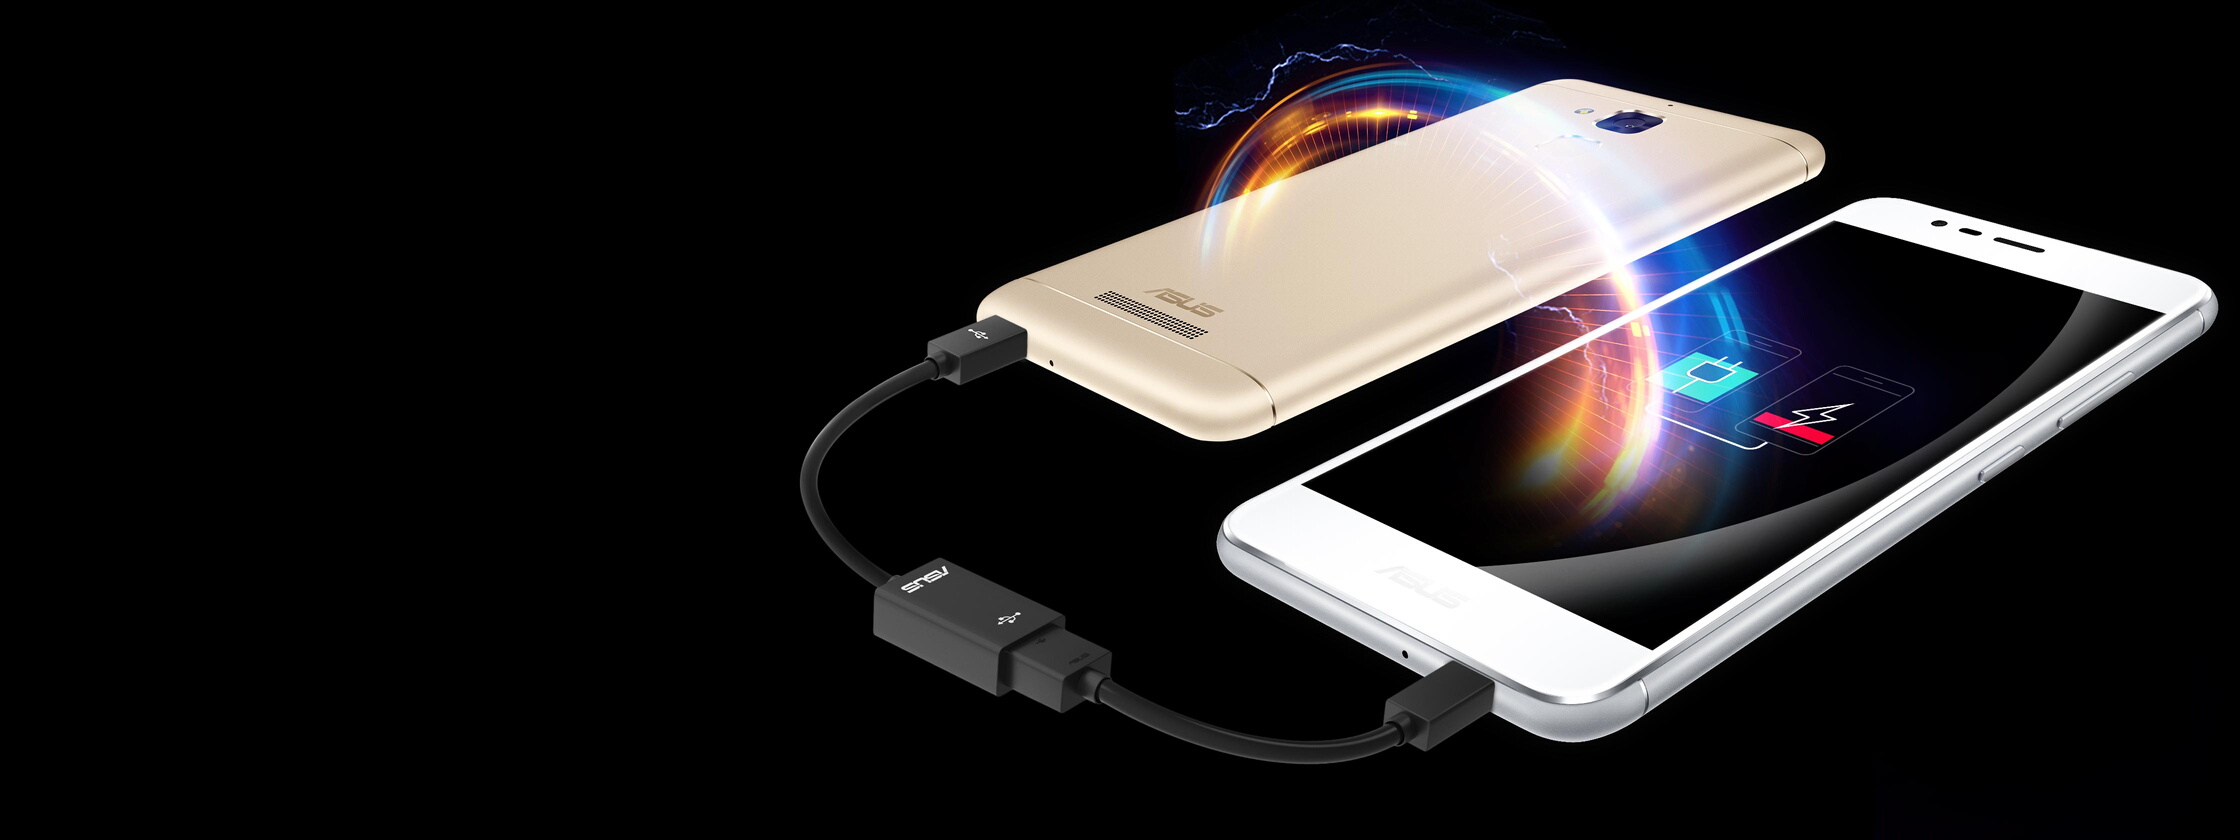 “Reverse Charging Your go-everywhere power bank ZenFone 3 Max’s 4100mAh battery capacity is so substantial that it’s able to double up as a power bank to charge your digital devices. So, no need to worry when your other gadgets run out of juice: just hook them up to ZenFone 3 Max and top up on the”???????